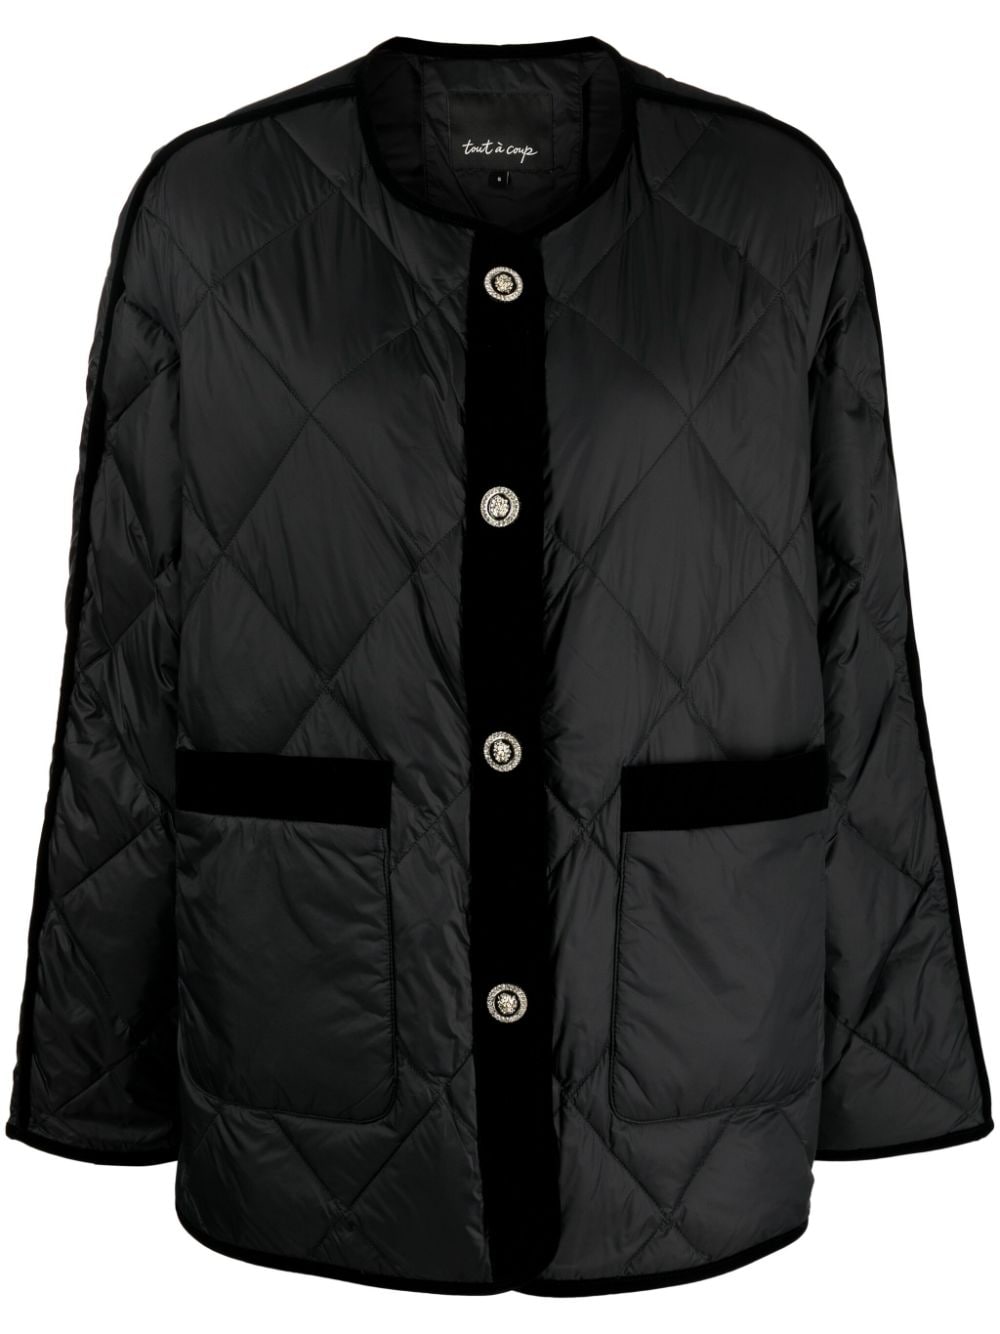 diamond-quilted down jacket